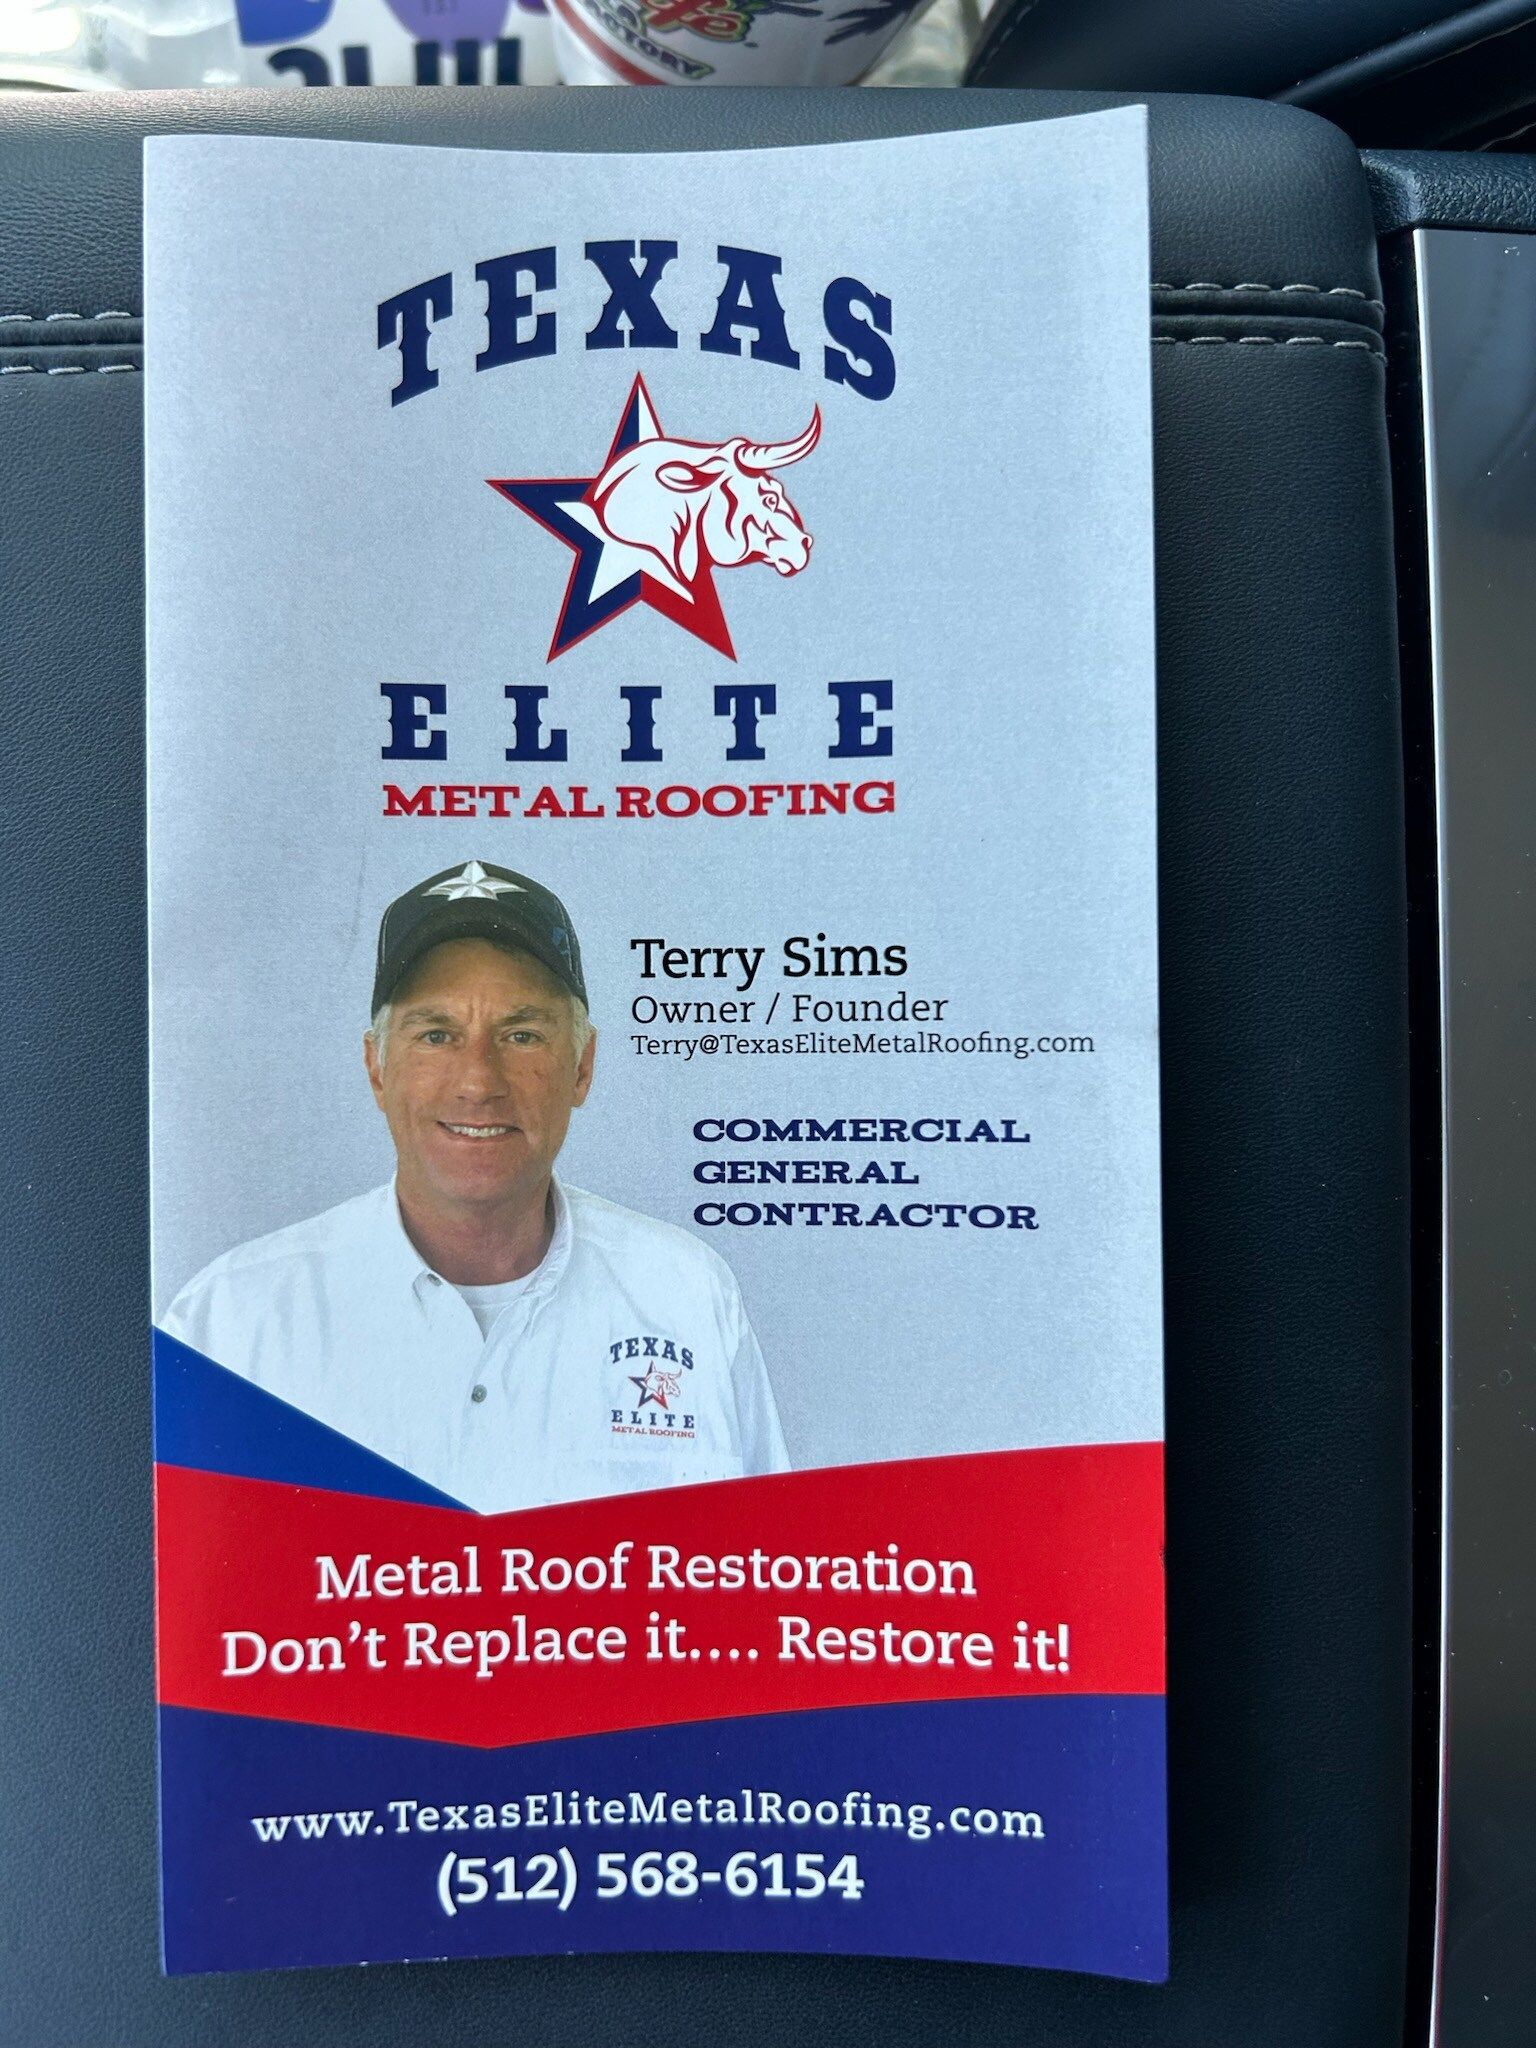 A business card for texas elite metal roofing